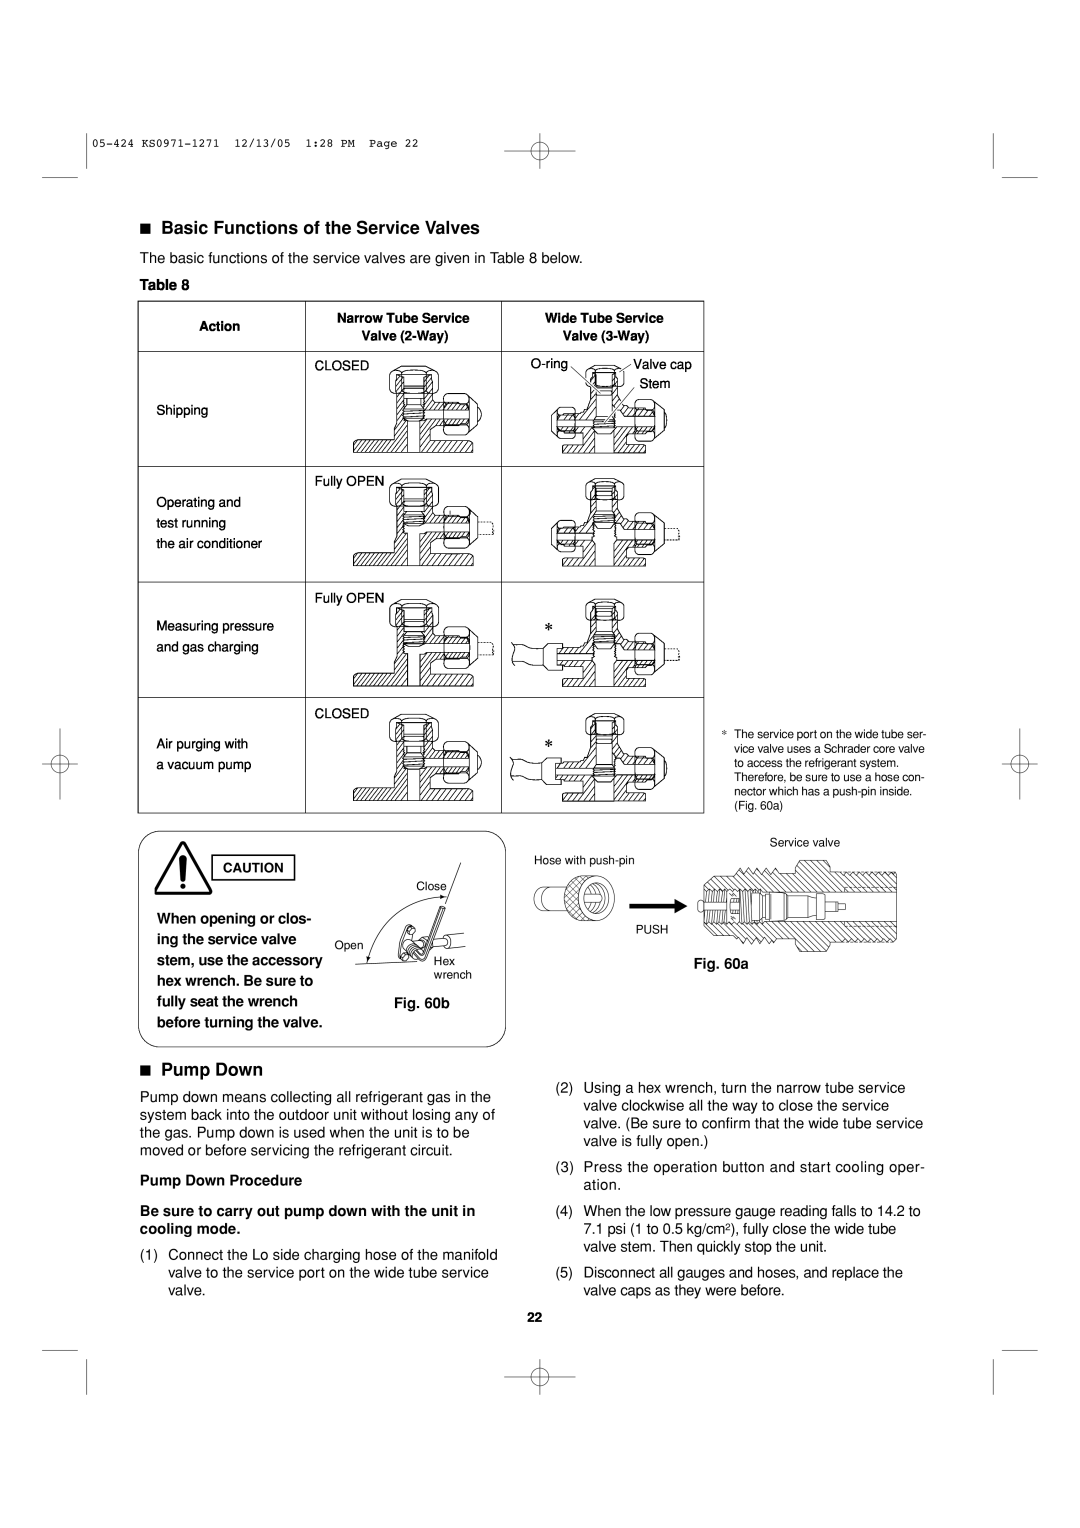 Sanyo Cool/Dry installation instructions Basic Functions of the Service Valves, Pump Down 